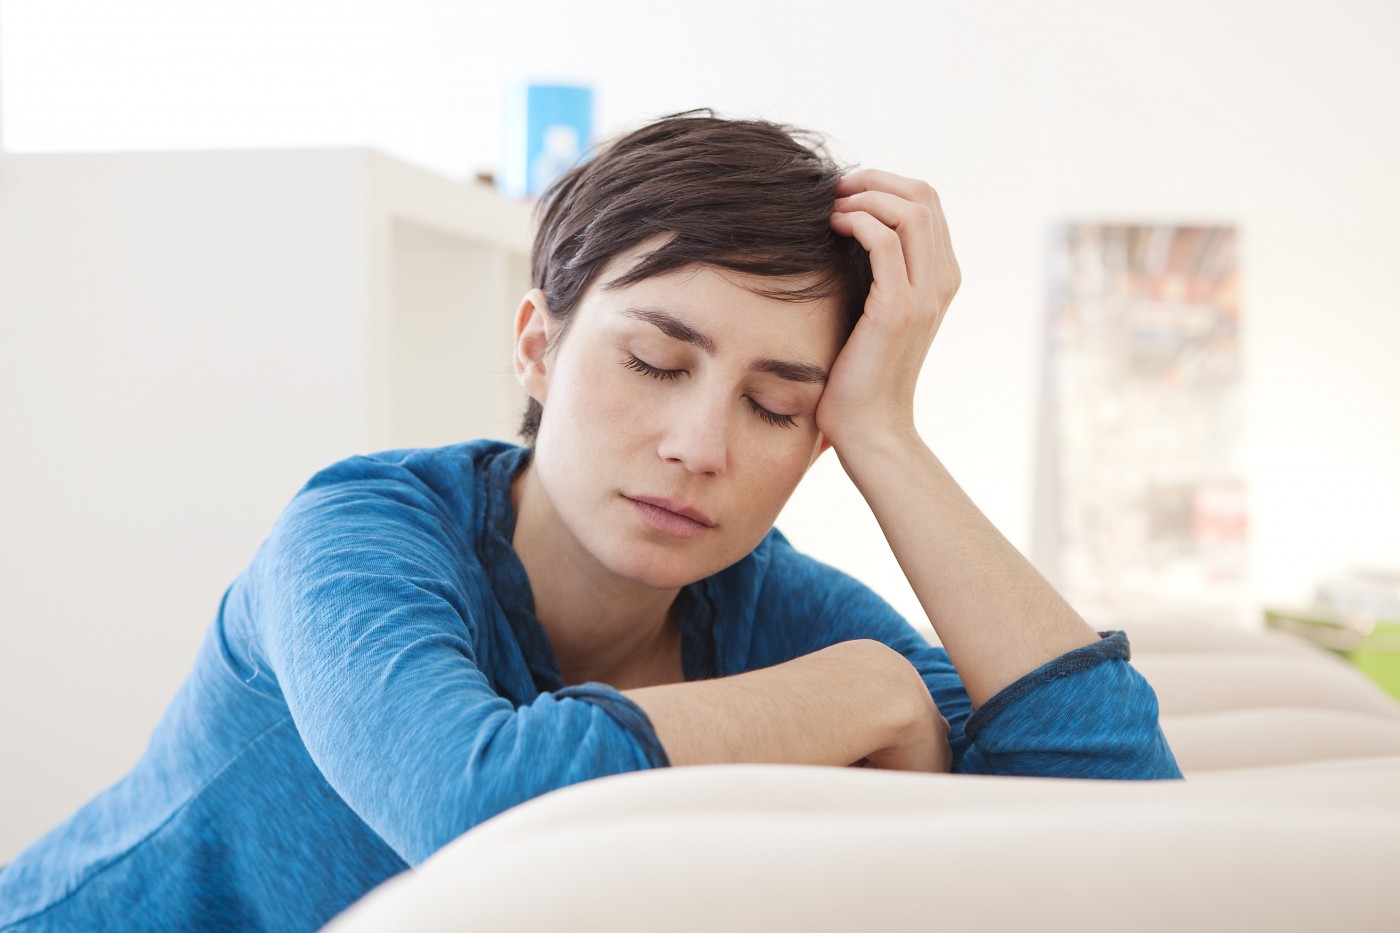 Study Shows Patients With RA Experience Neuropathic Pain, Fibromyalgia and Migraines